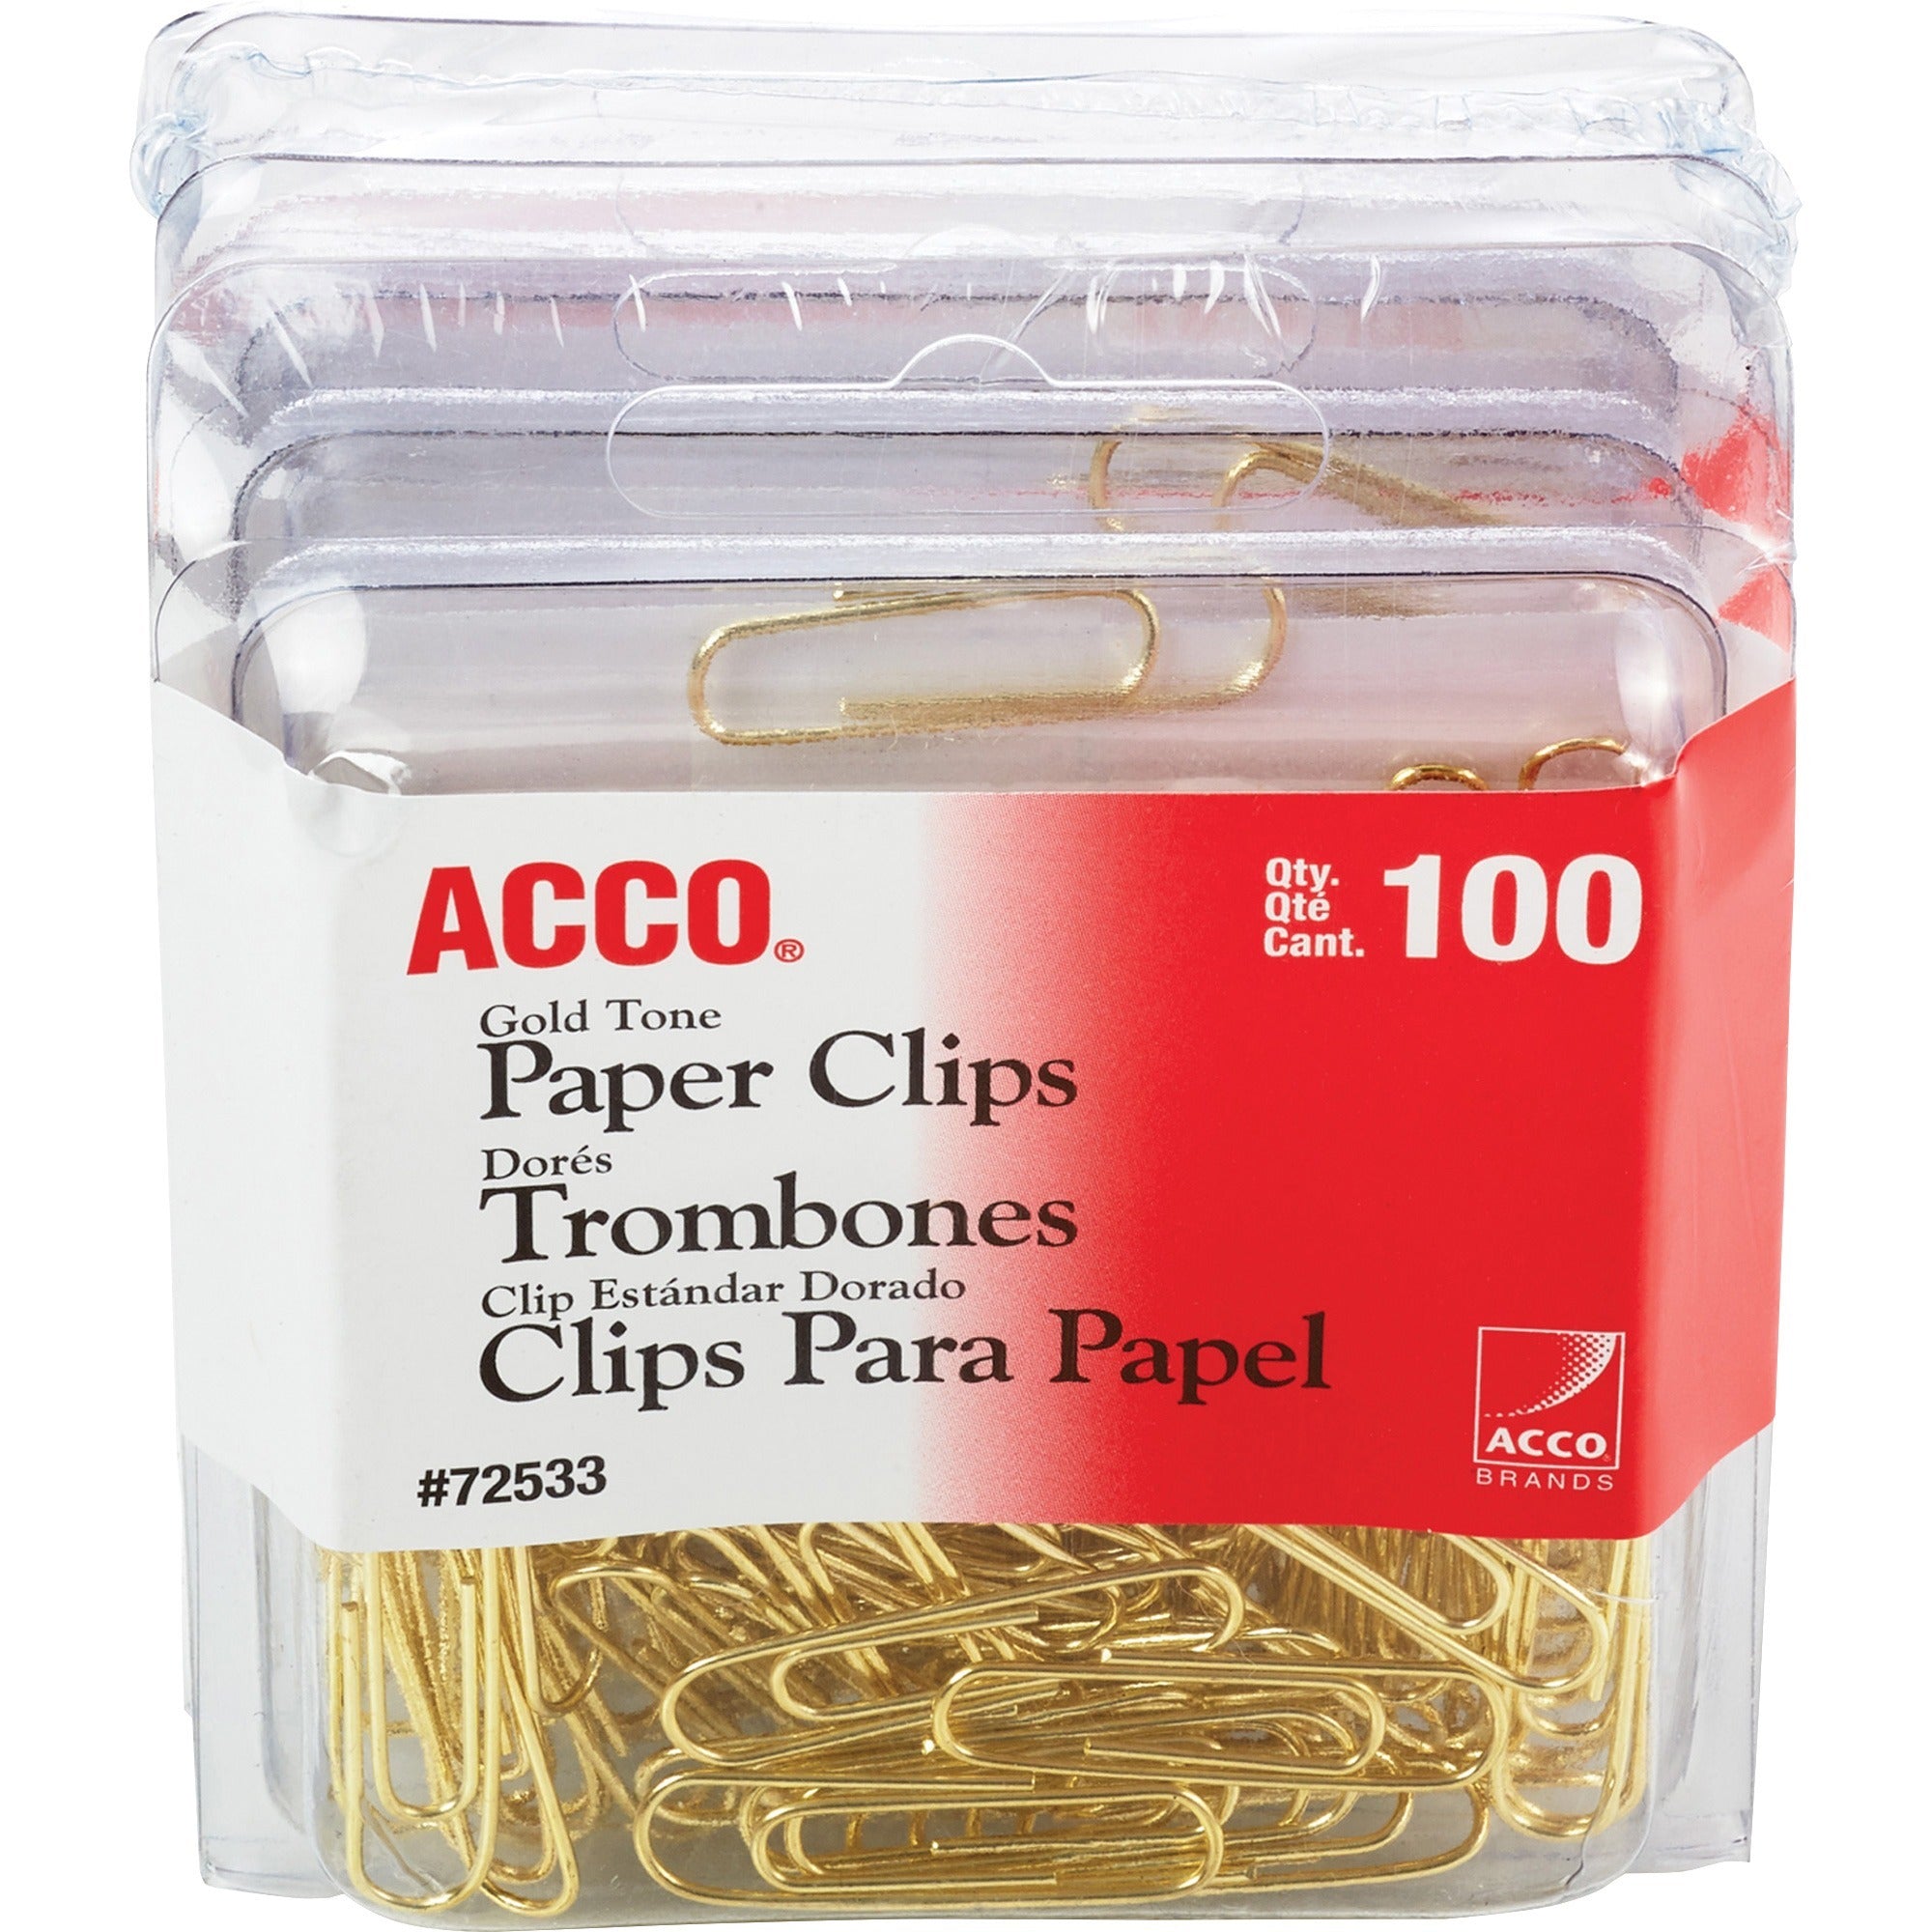 acco-gold-tone-paper-clips-no-2-14-length-x-05-width-10-sheet-capacity-for-office-home-school-document-paper-sturdy-flex-resistant-bend-resistant-400-pack-gold_acc72554 - 1